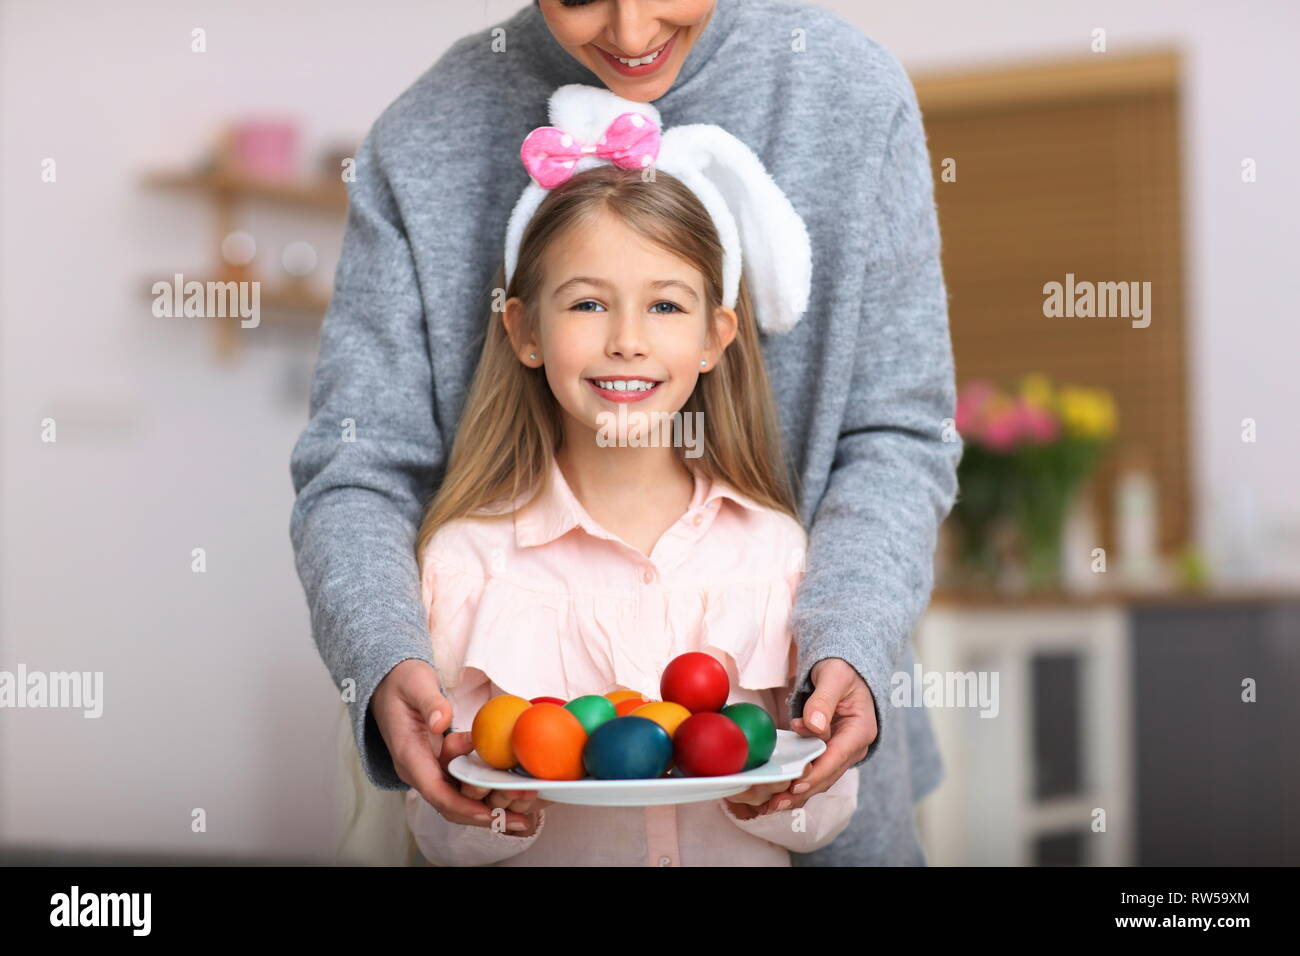 Mother and daughter painting Easter eggs at home Stock Photo